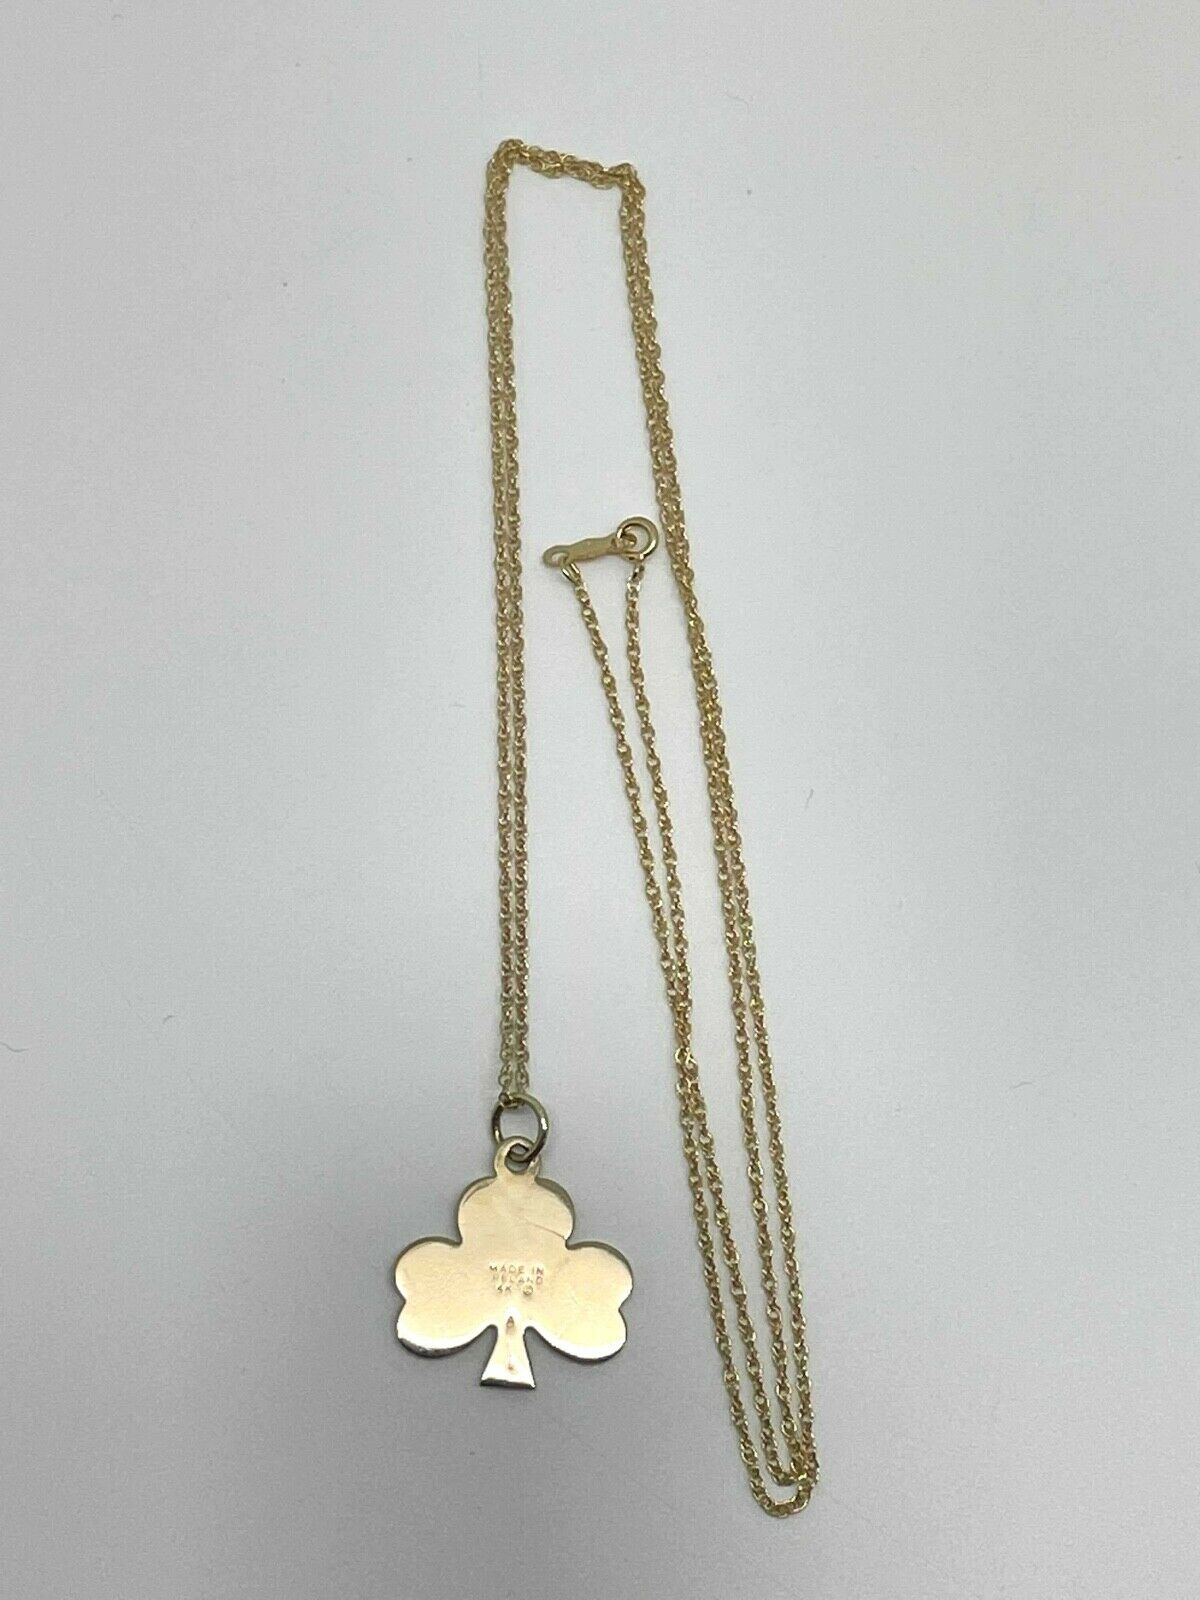 14k Yellow Gold Clover Necklace, Made in Ireland, 24 inches - 4.0g